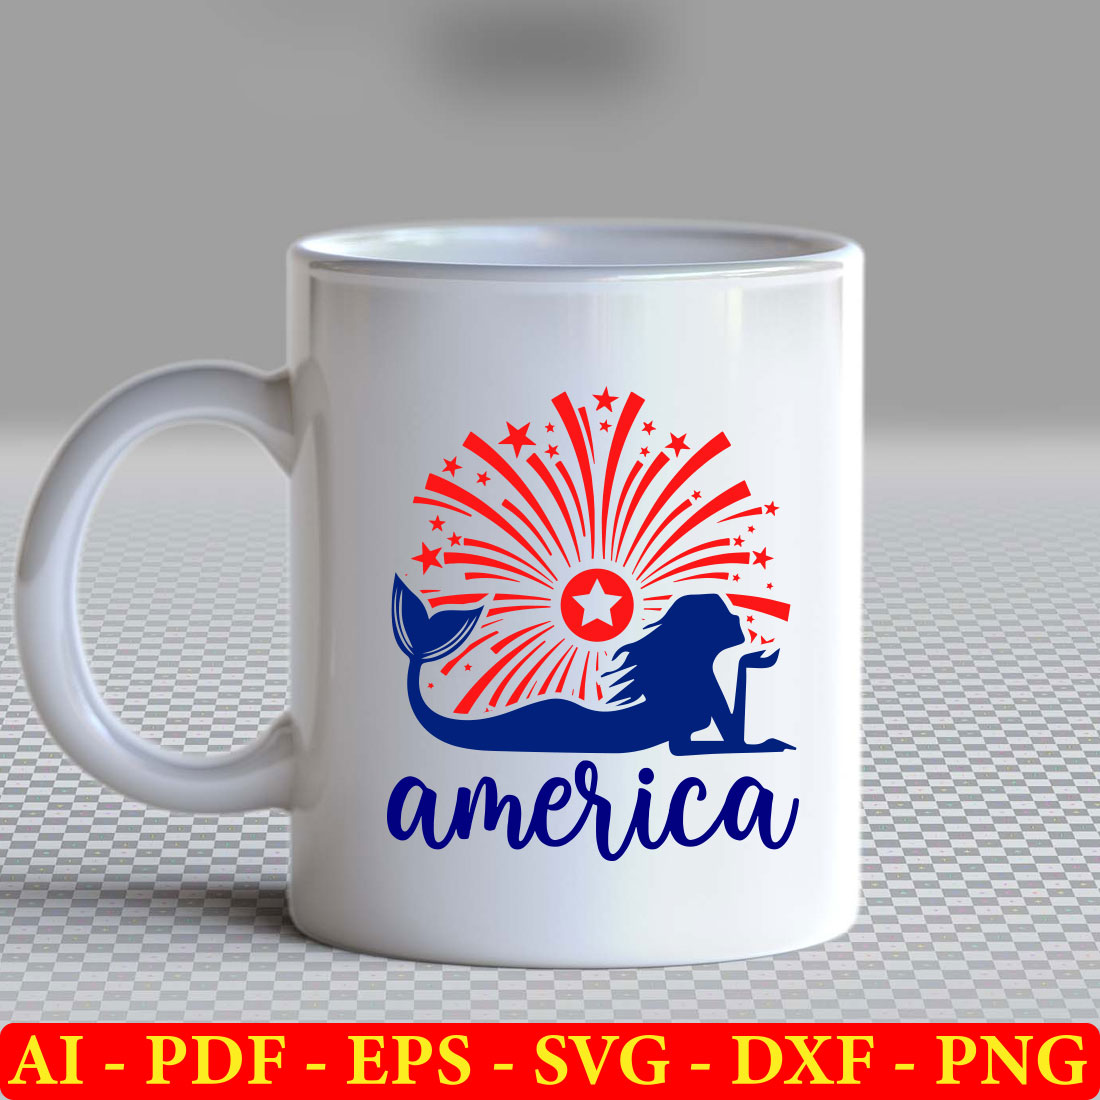 White coffee mug with the word america on it.